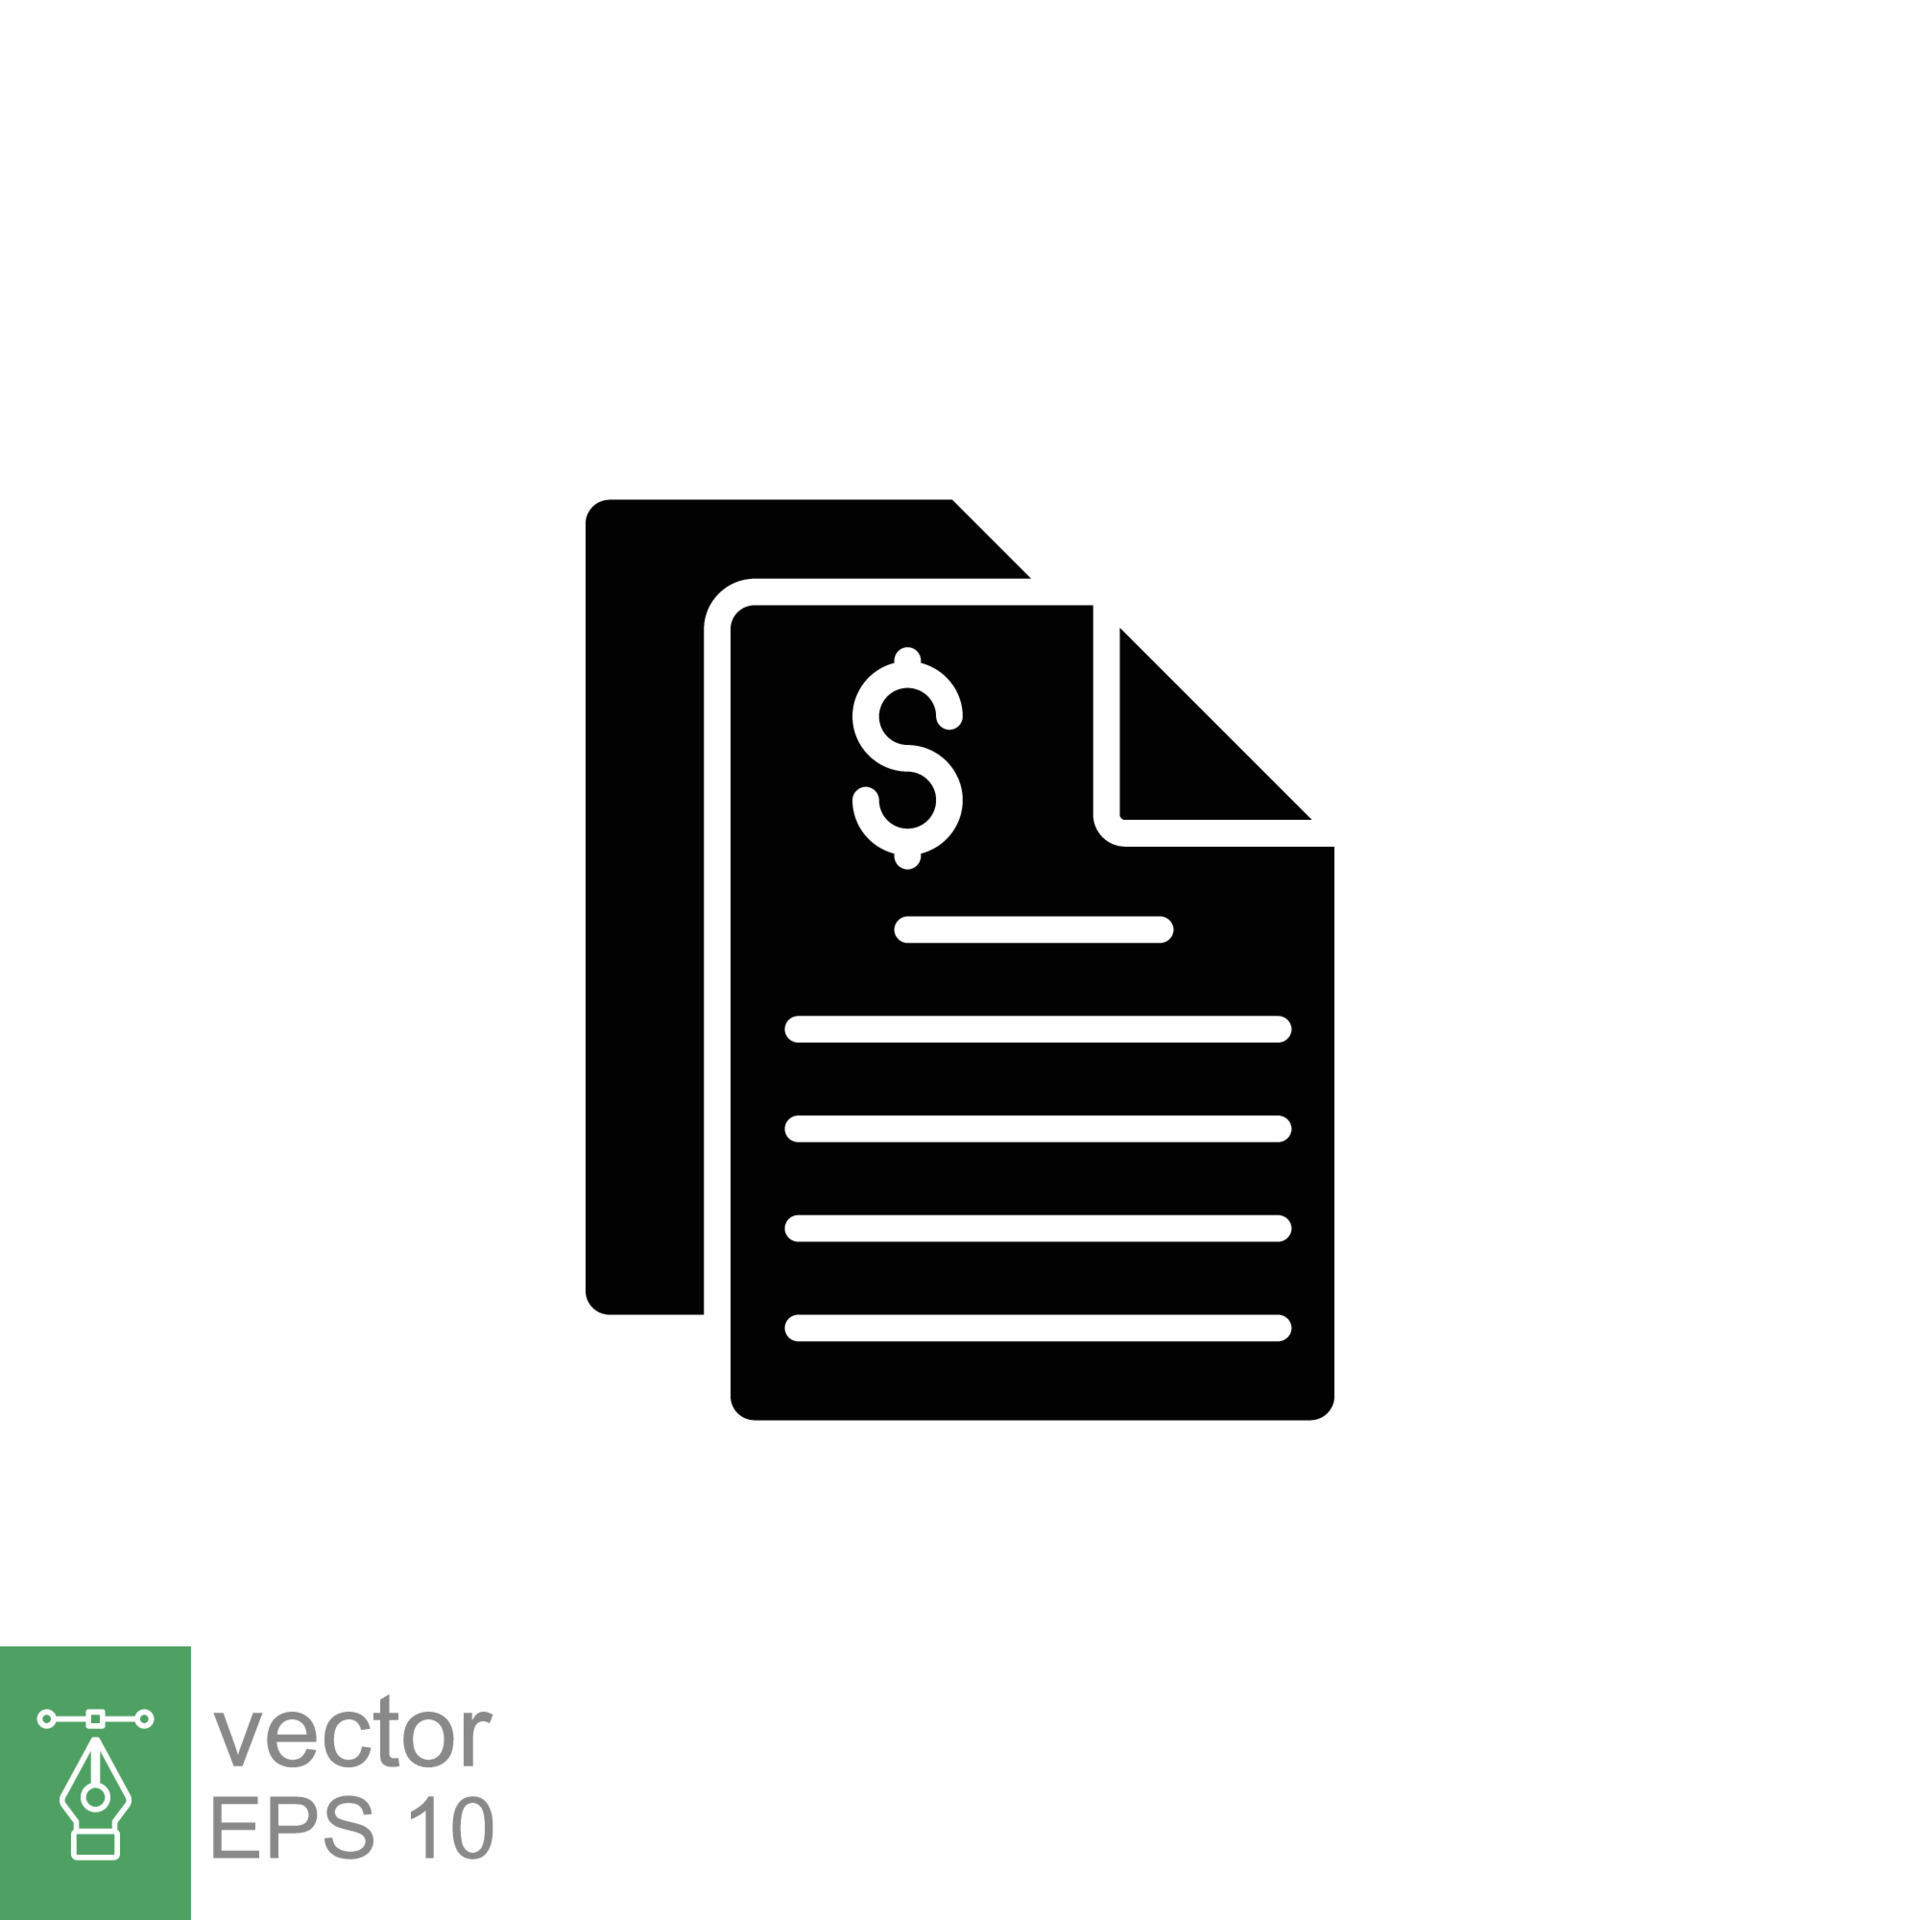 https://static.vecteezy.com/system/resources/previews/023/899/391/original/bank-statement-icon-simple-solid-style-slip-receipt-bill-financial-invoice-paper-business-concept-black-silhouette-glyph-symbol-illustration-isolated-on-white-background-eps-10-vector.jpg